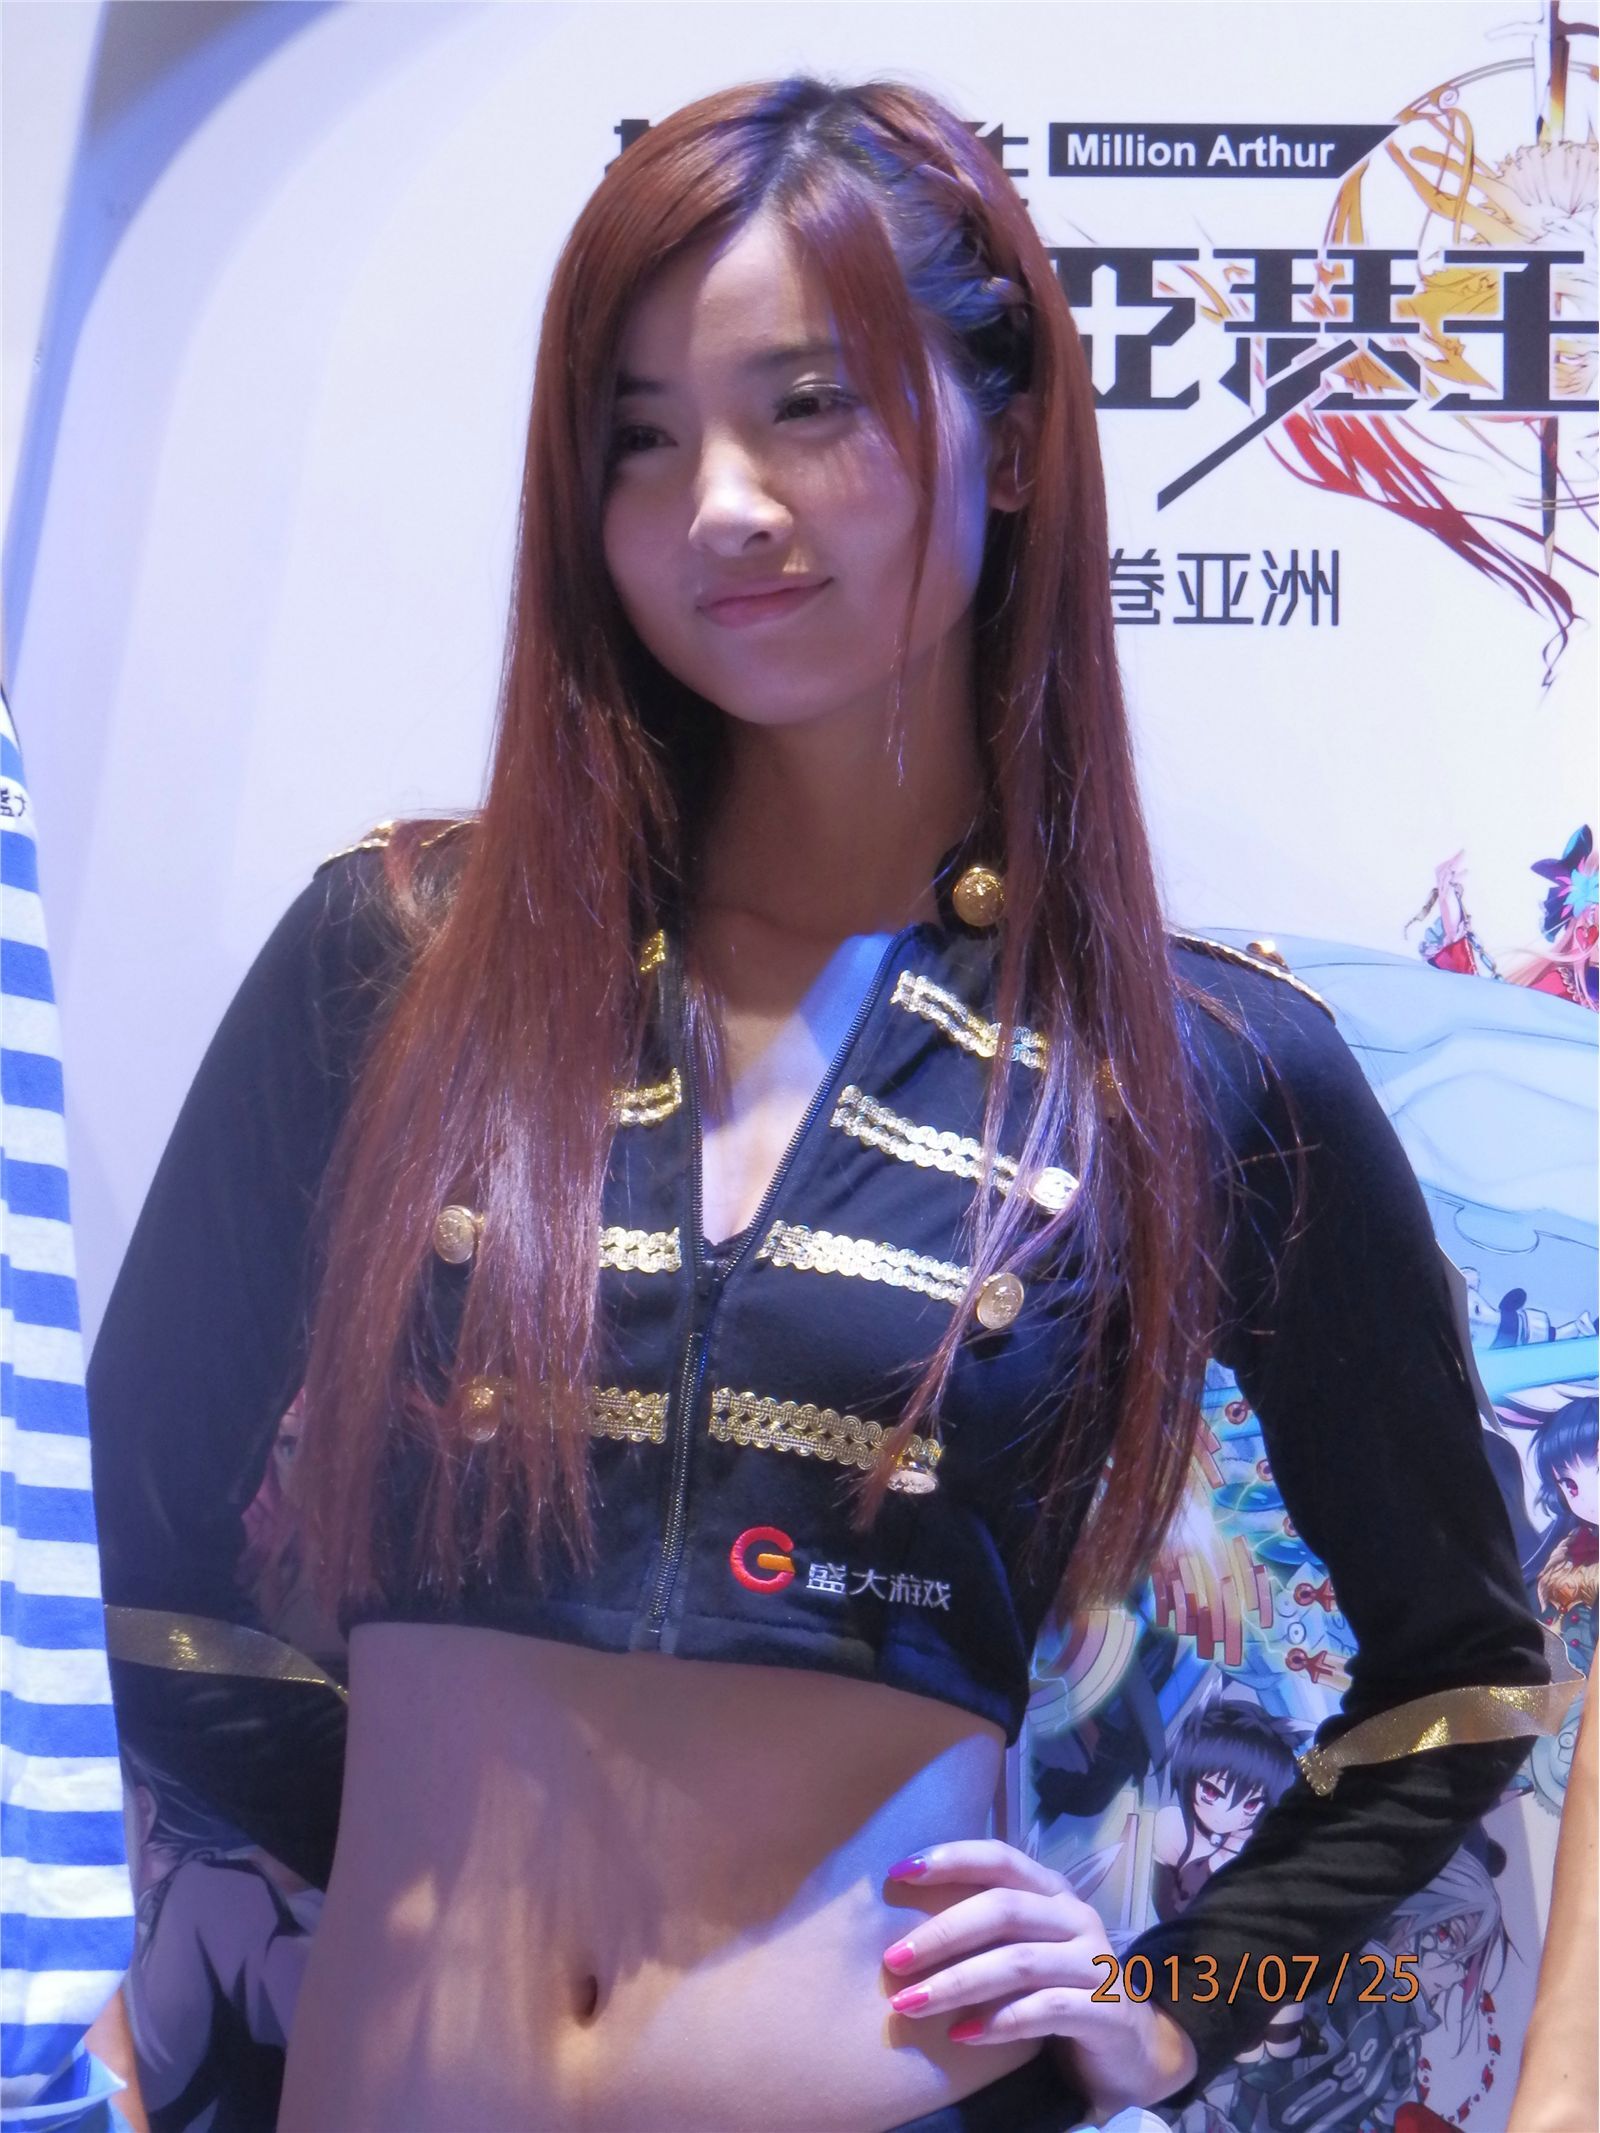 [online collection] July 27, 2013 Part 2 of the first day of the 11th ChinaJoy in Shanghai